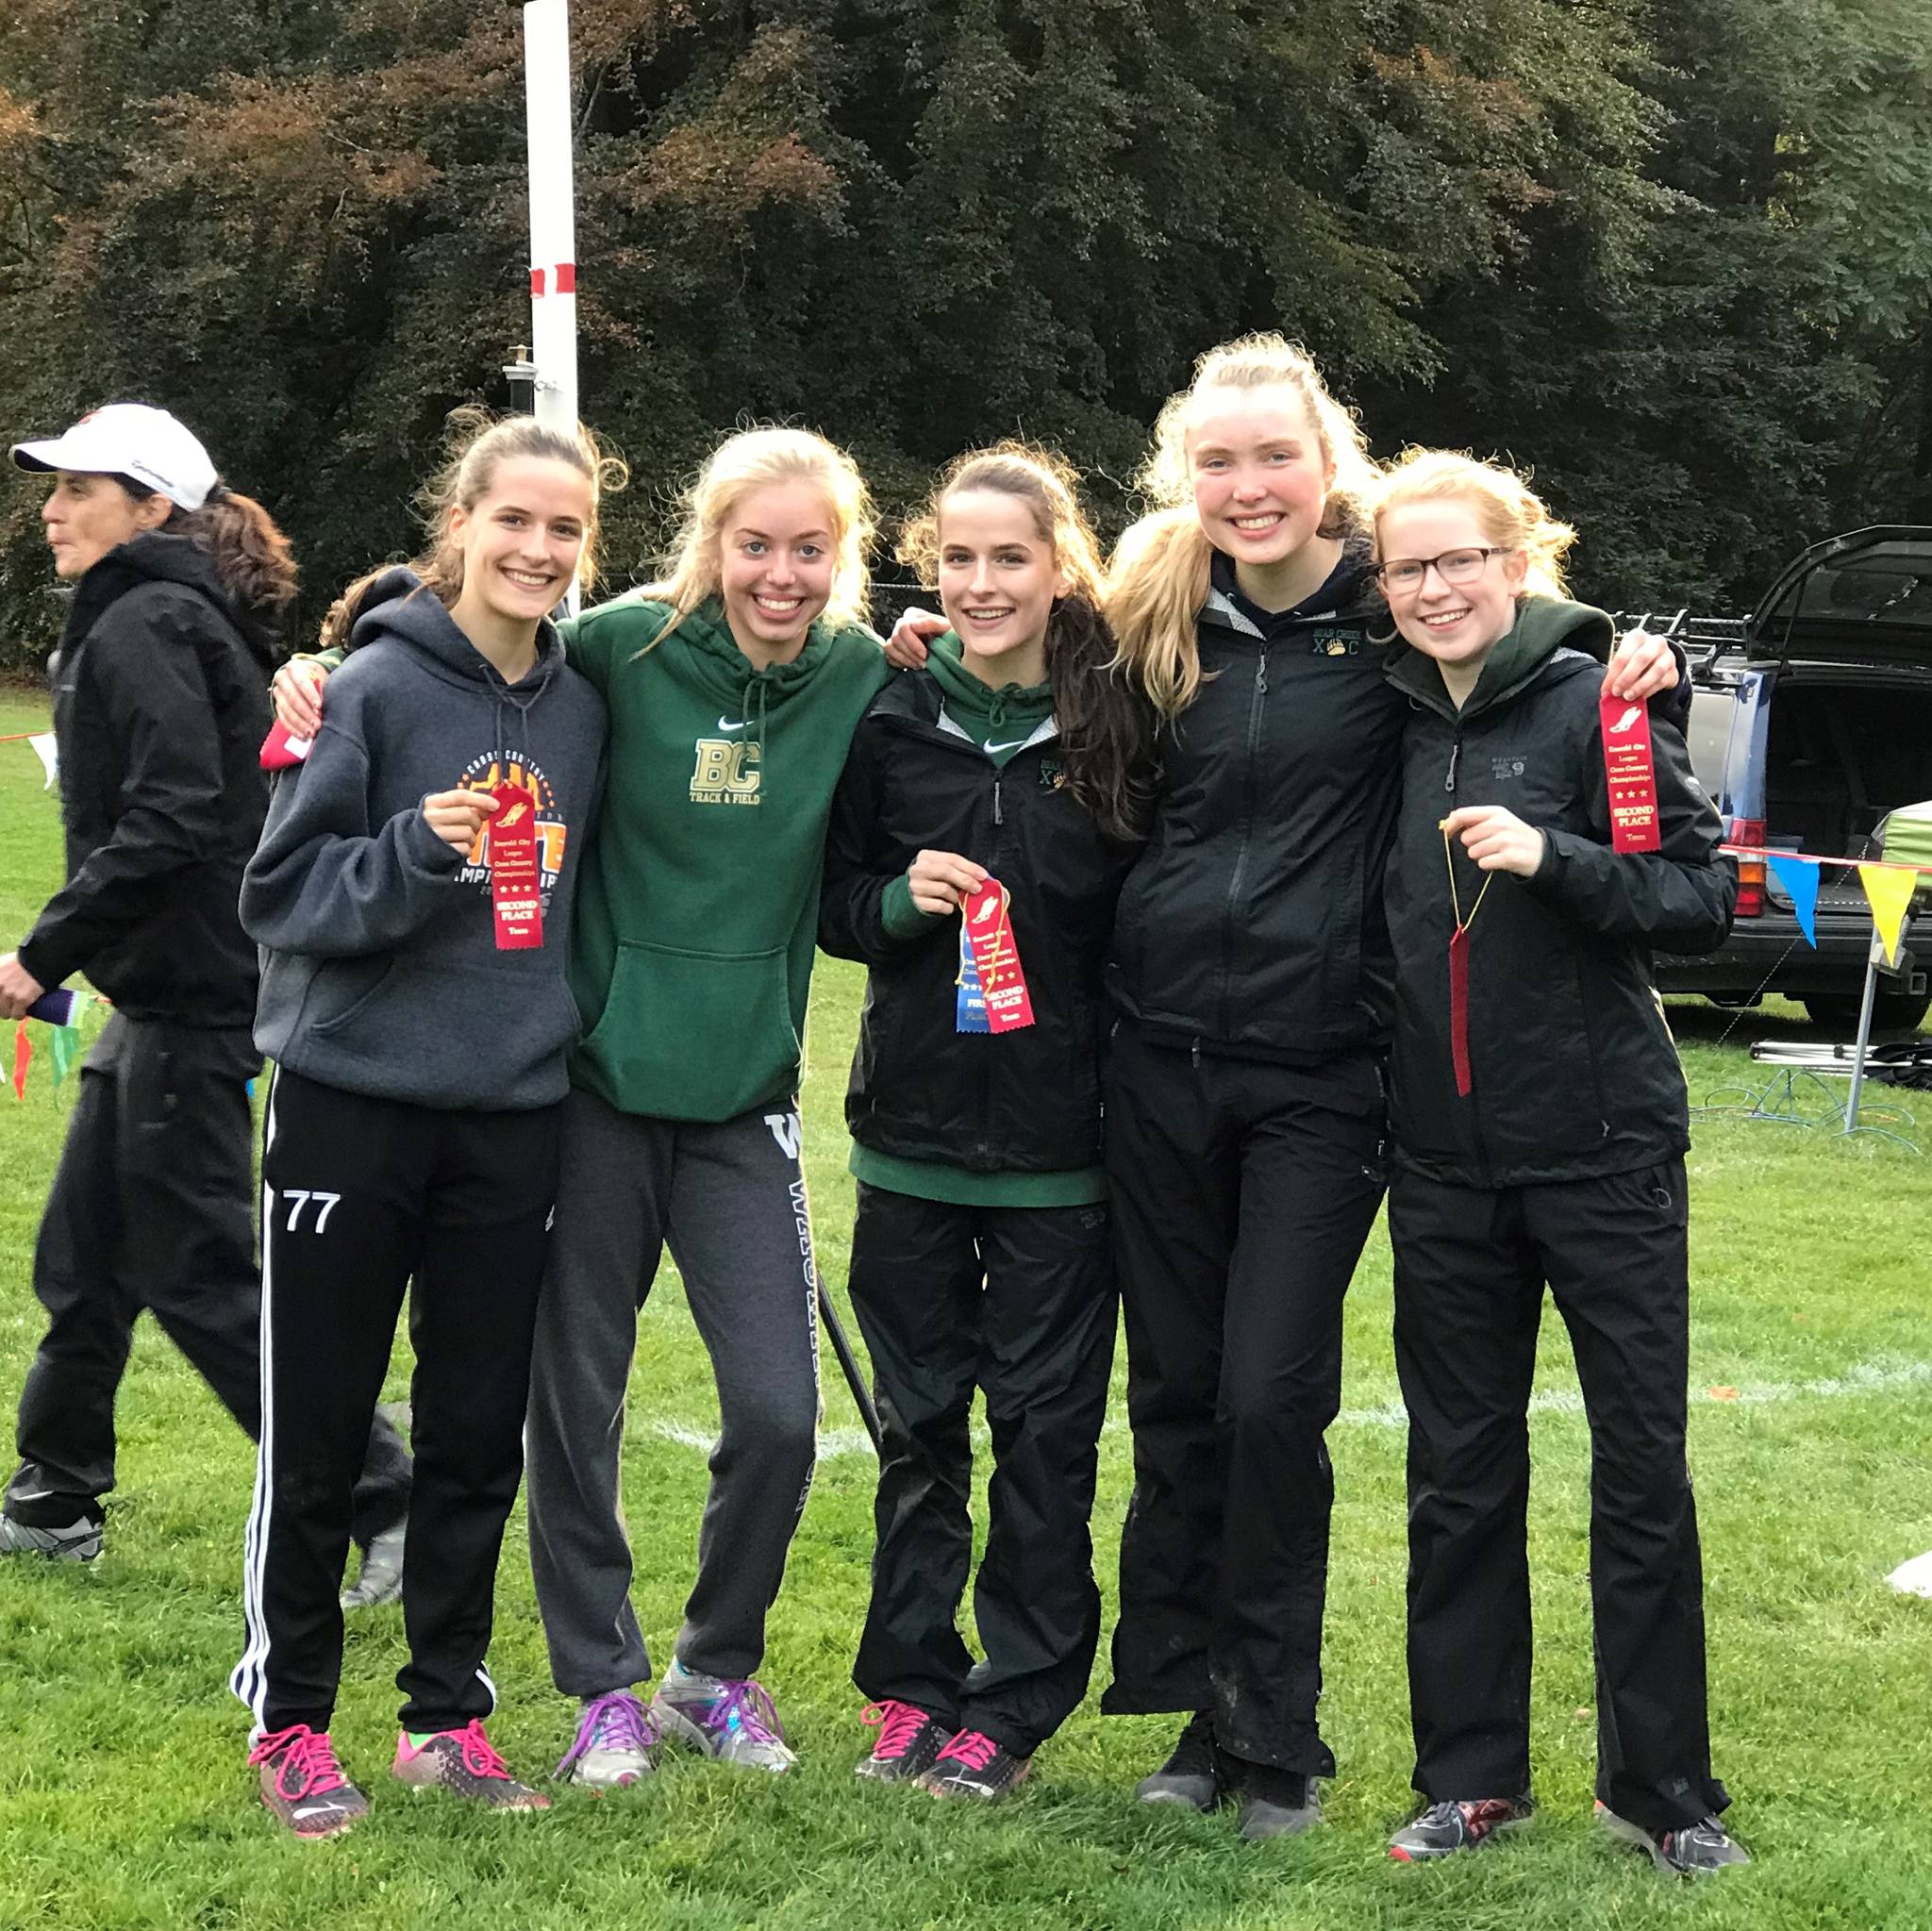 Bear Creek’s girls cross-country team, from left, Olivia Markezich, Tiffany Cowman, Andrea Markezich, Lucy Caile and Jennifer Buckley (not pictured: Meagan Mulligan). Courtesy of Alice Detwiler